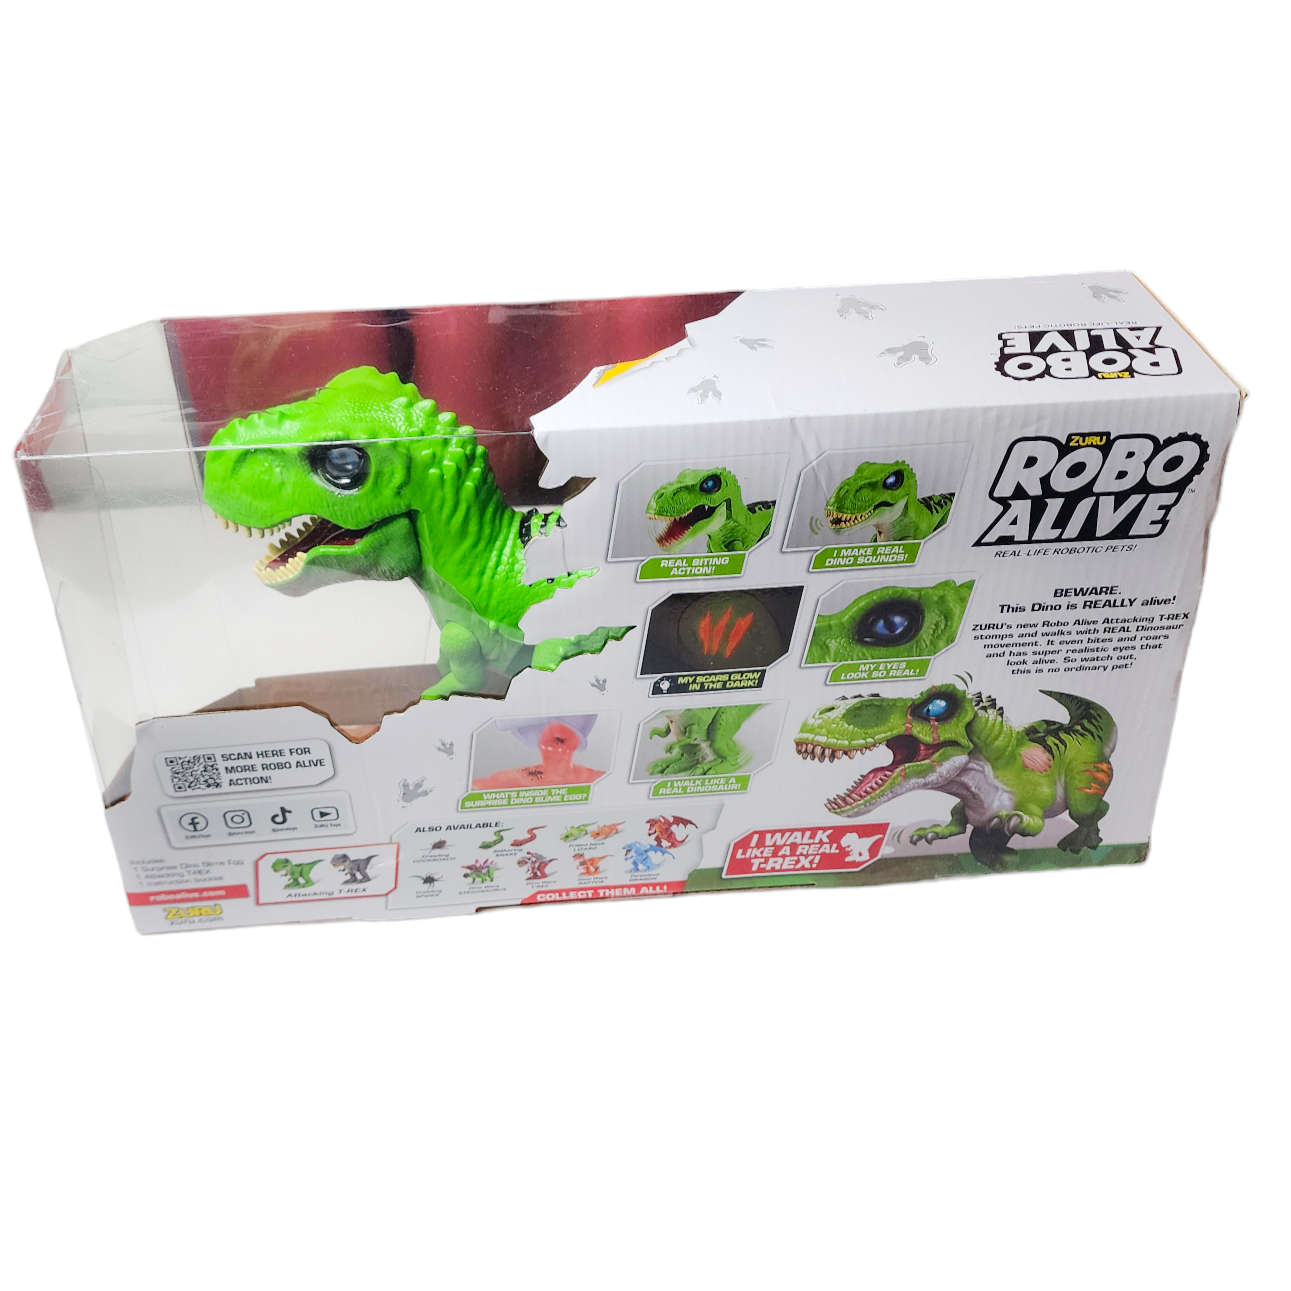 Robo Alive Attacking GREEN TRex Battery Powered Robotic Toy by Zuru